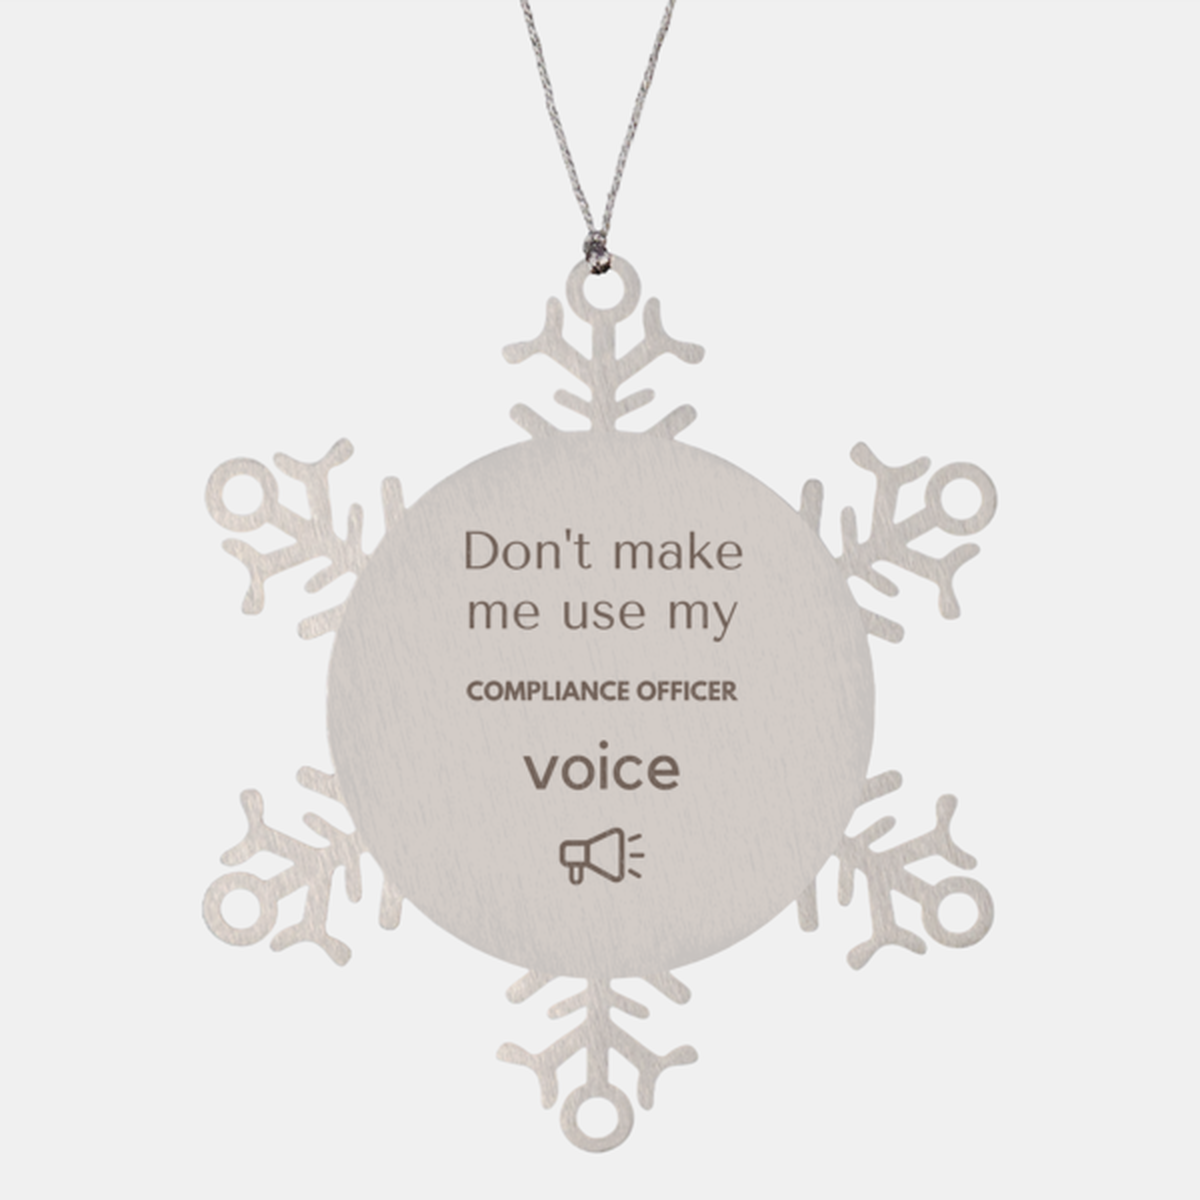 Don't make me use my Compliance Officer voice, Sarcasm Compliance Officer Ornament Gifts, Christmas Compliance Officer Snowflake Ornament Unique Gifts For Compliance Officer Coworkers, Men, Women, Colleague, Friends